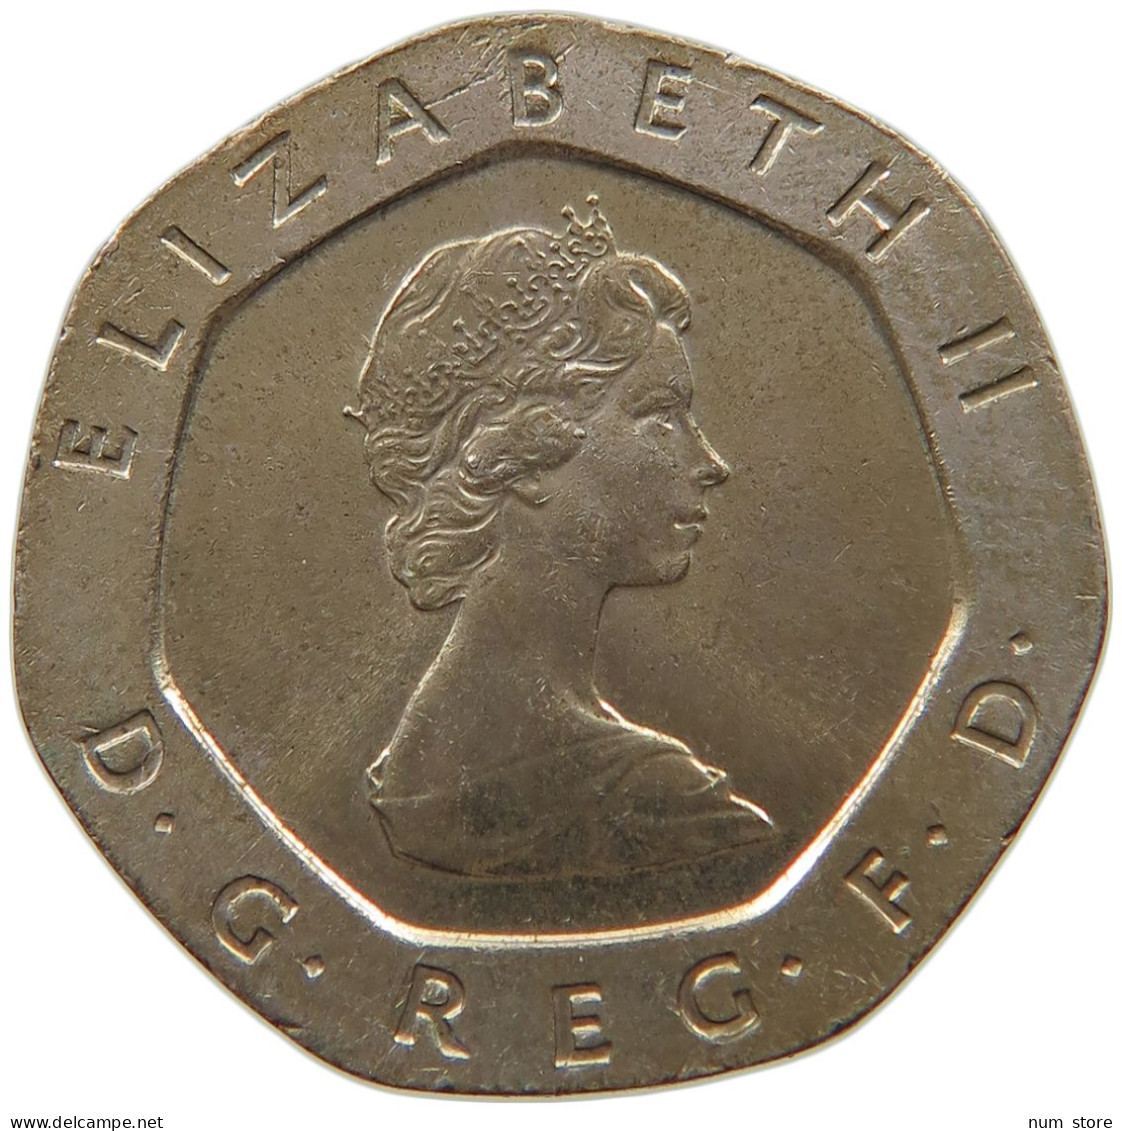 GREAT BRITAIN 20 PENCE 1982 #a034 0643 - 20 Pence